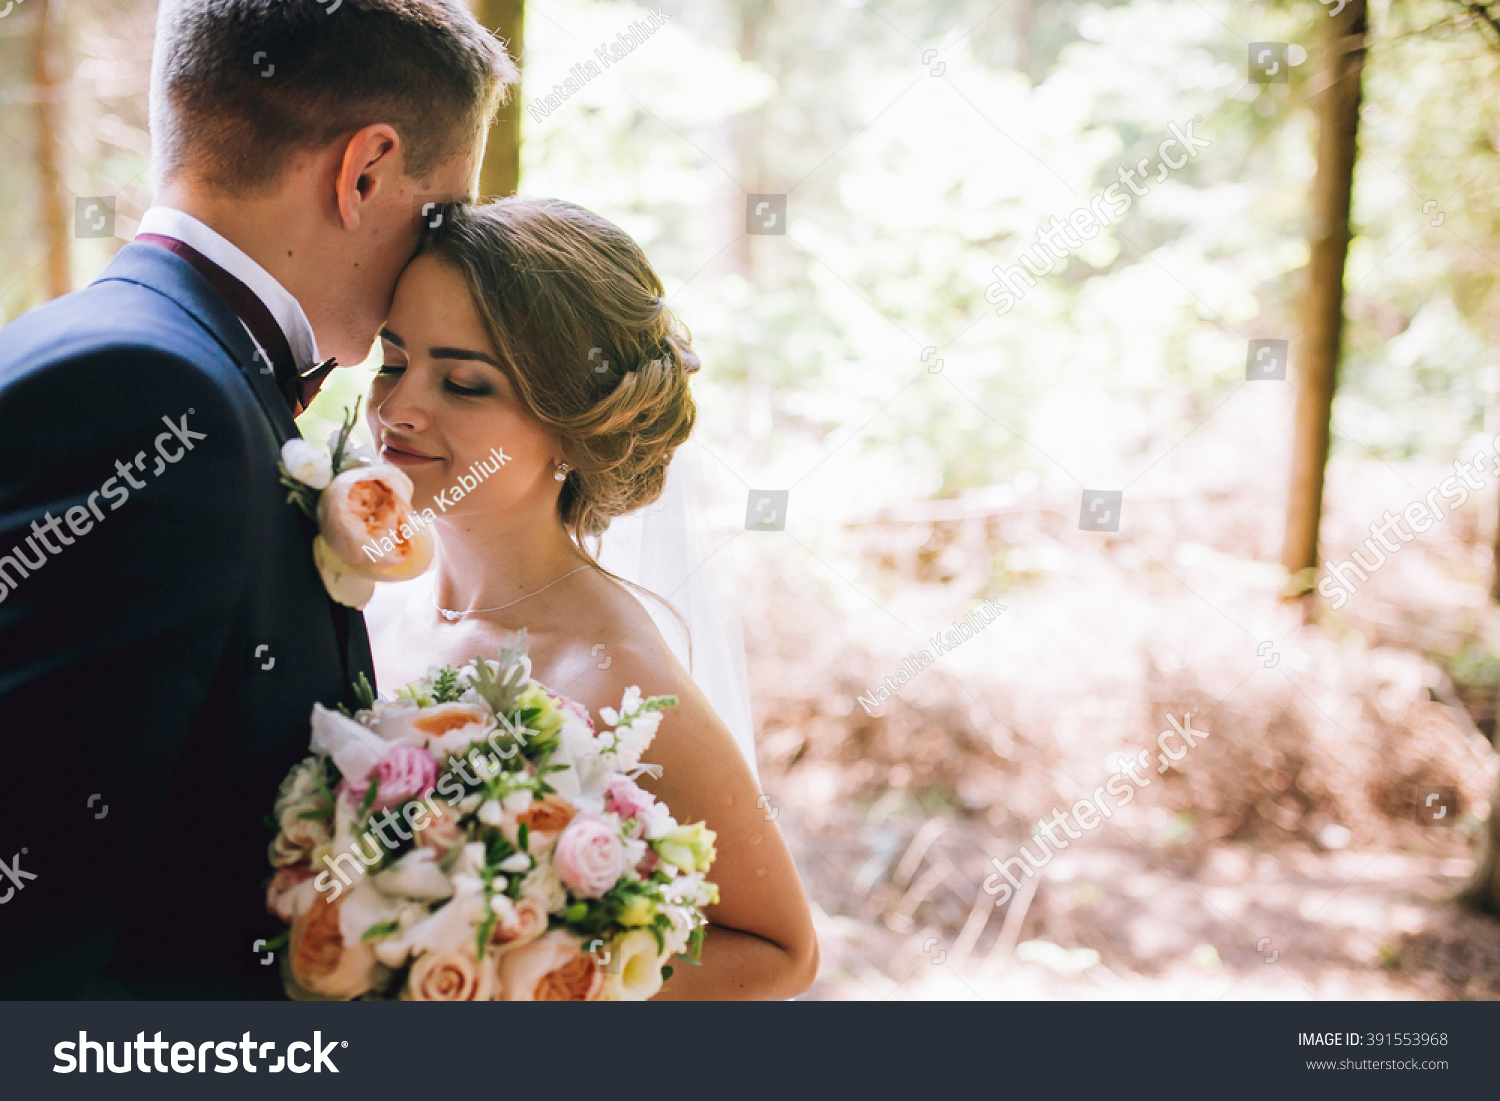 Bride and groom in a park kissing.couple newlyweds bride and groom at a wedding in nature green forest are kissing photo portrait.Wedding Couple #391553968